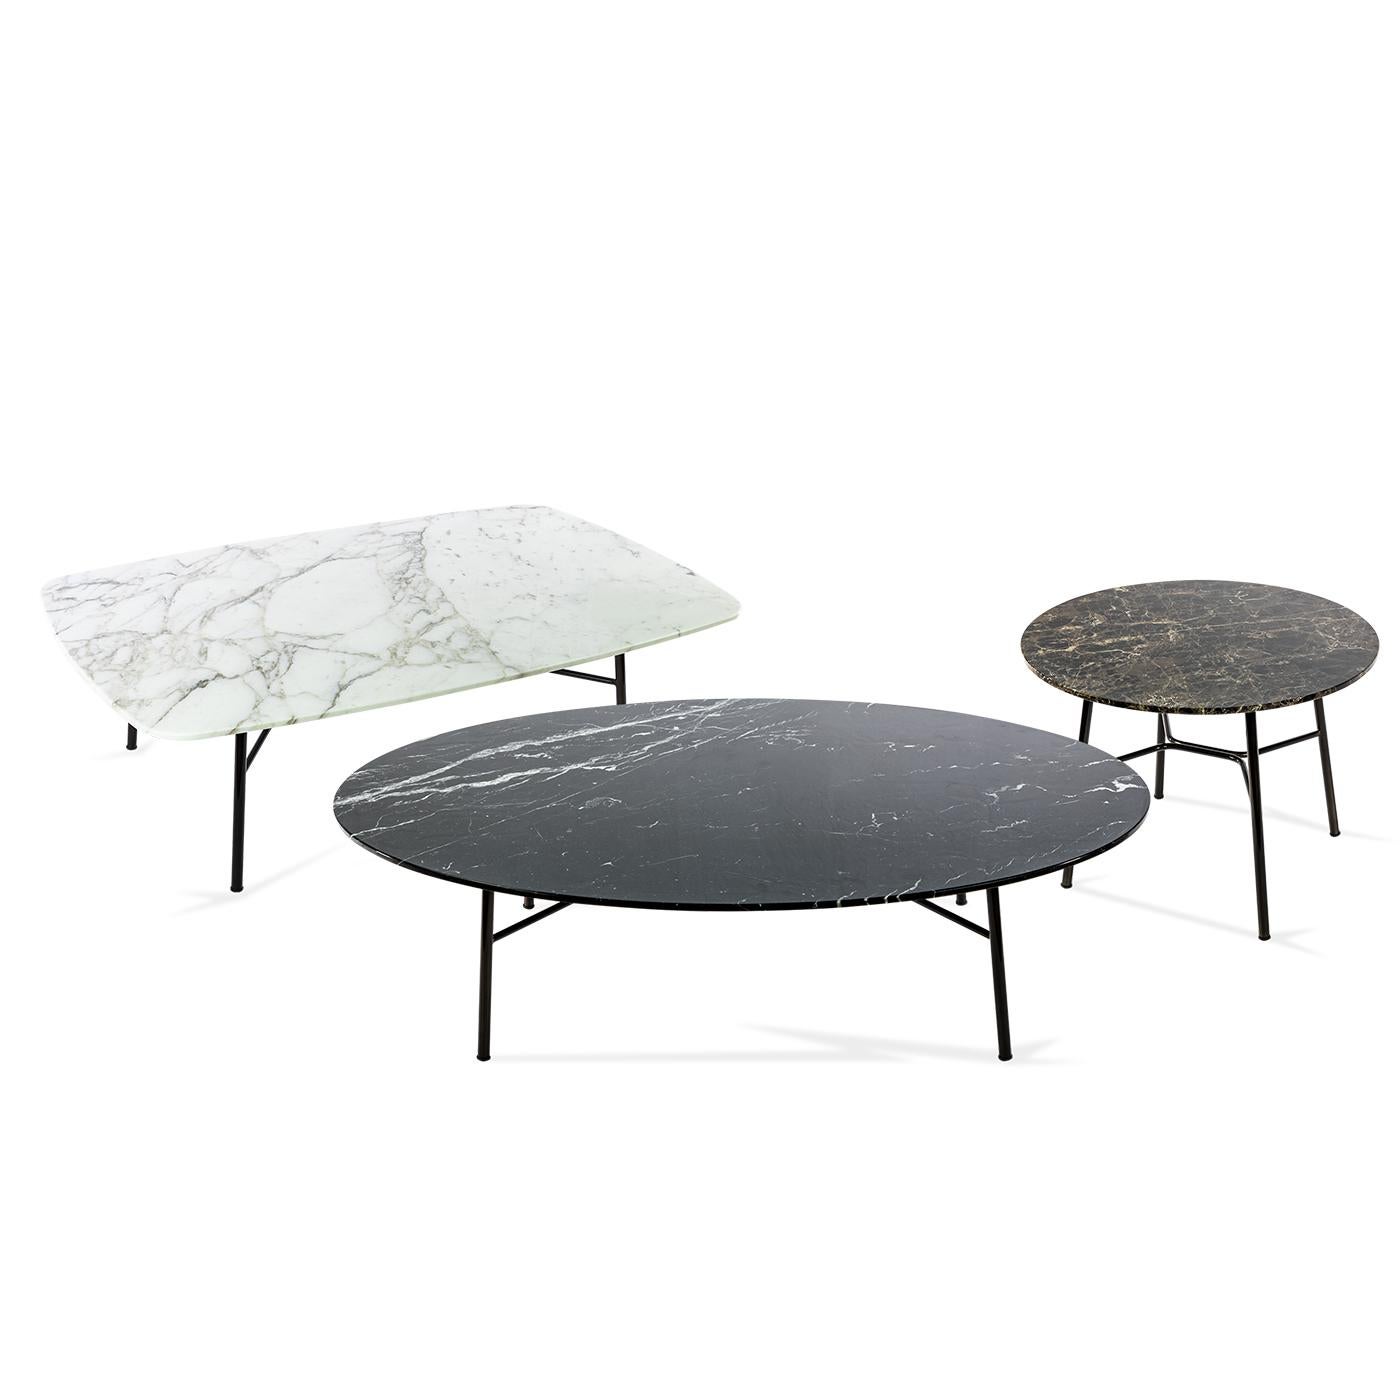 Yuki Oval Coffee Table with Black Marquinia Top #1 by EP Studio In New Condition For Sale In Milan, IT